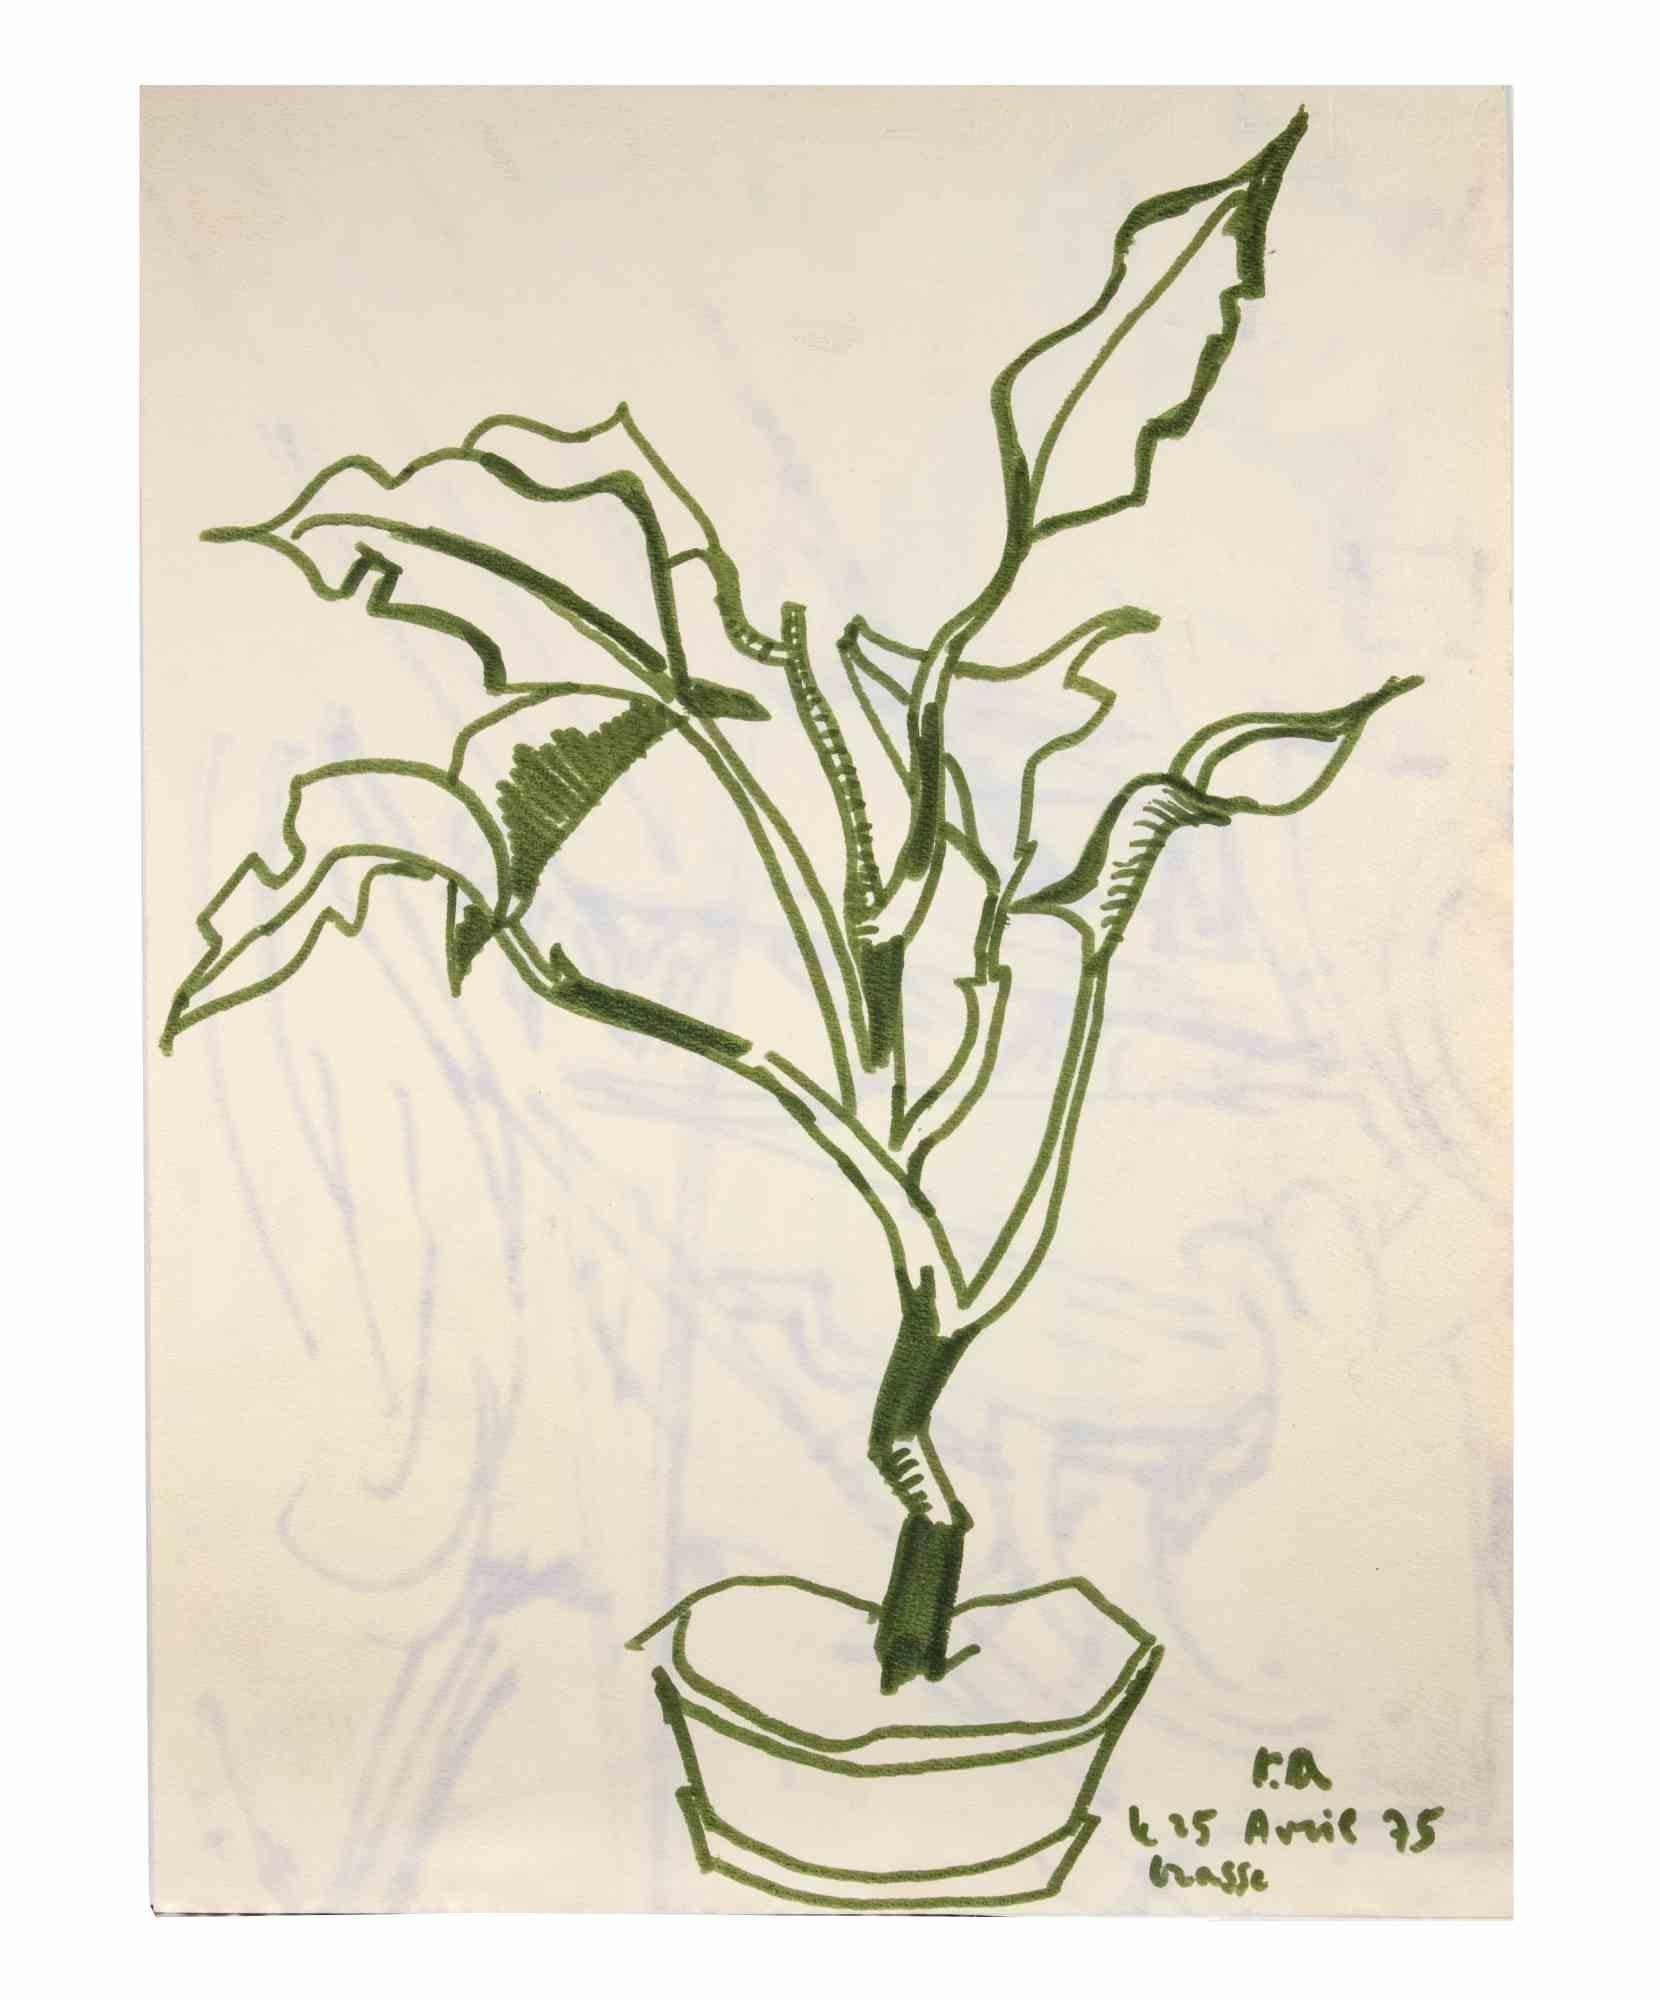 Plant is a Color Marker Drawing realized by  Reynold Arnould  (Le Havre 1919 - Parigi 1980).

Good condition.

No signature, dated on the lower right corner.

Reynold Arnould was born in Le Havre, France in 1919. He studied at l'École des Beaux-Arts